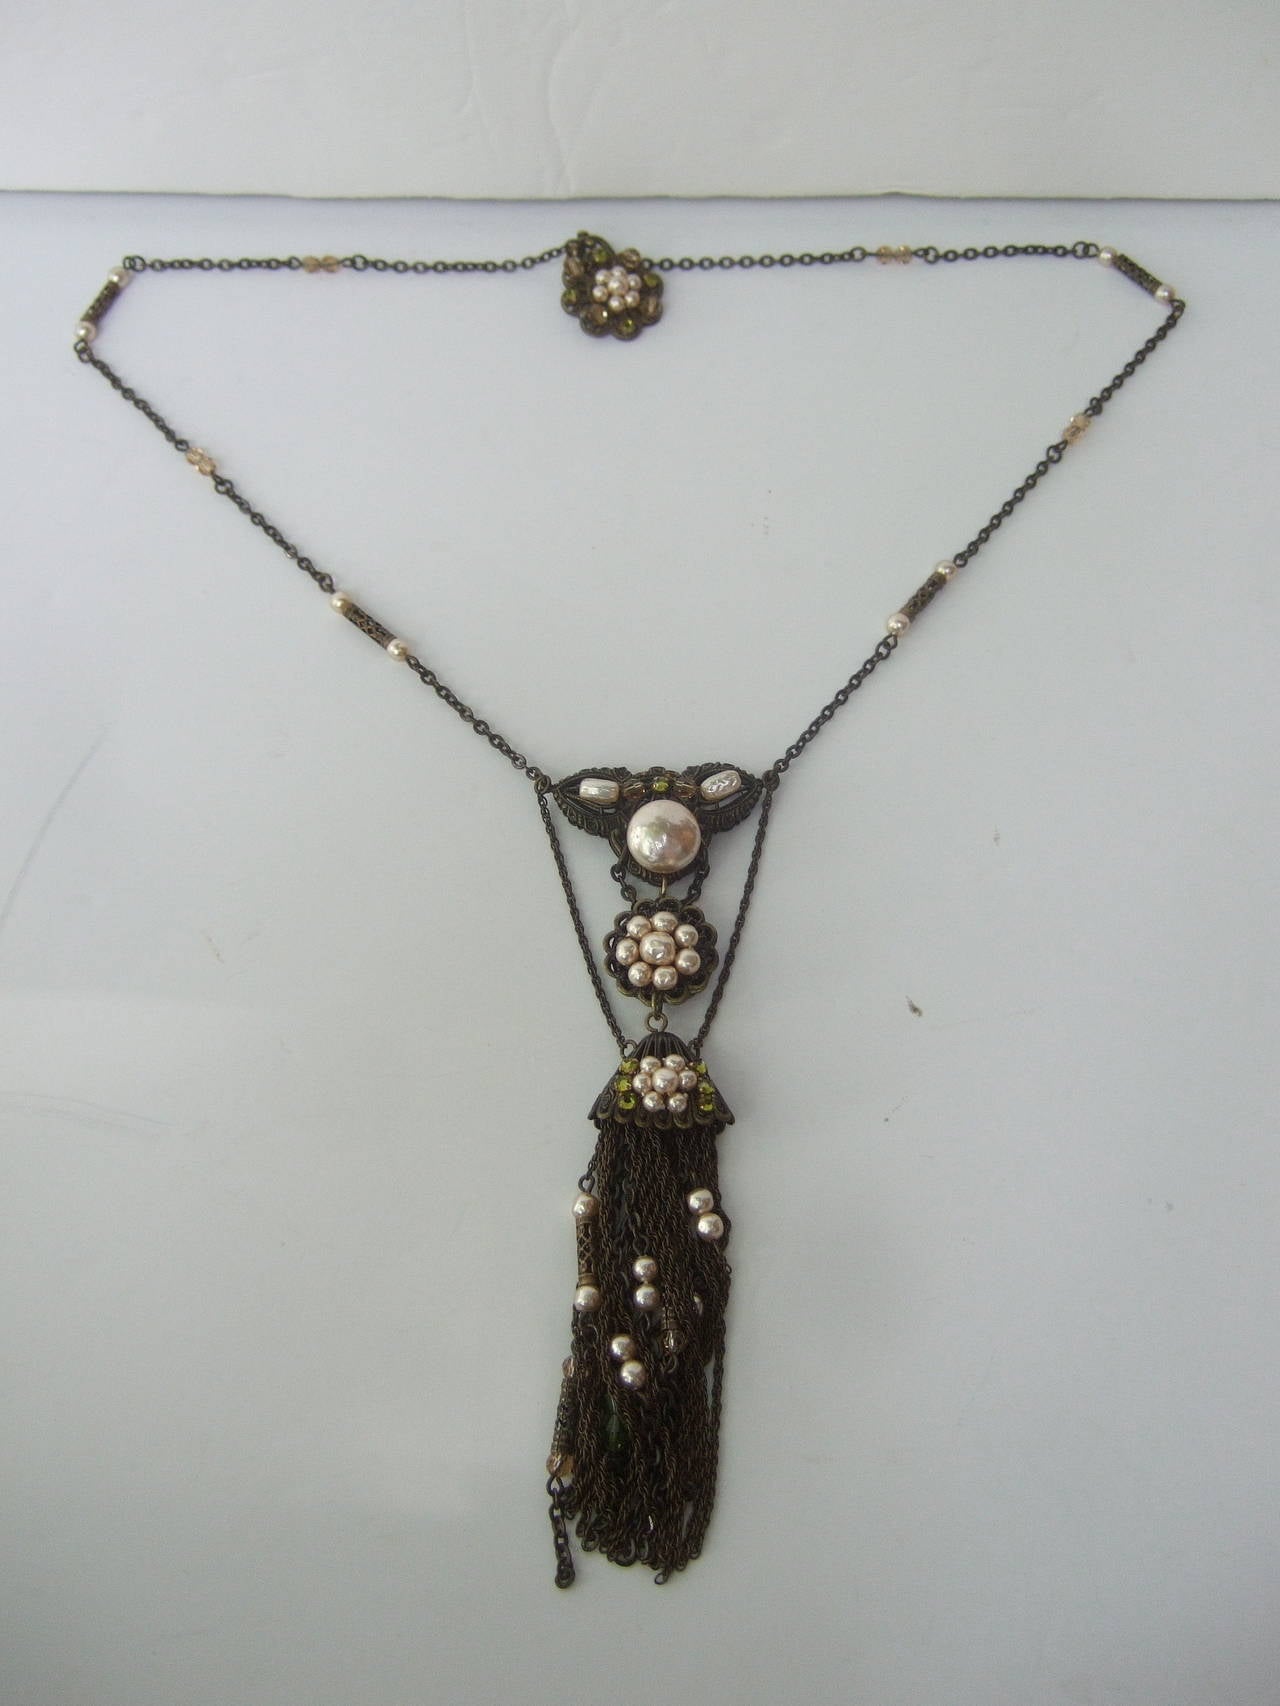 Exquisite Miriam Haskell Glass pearl sautoir chain necklace c 1940
The elegant dramatic necklace is embellished with baroque
enamel glass pearls & restrained crystals

The center tiered pendant is encrusted with clusters of lustrous